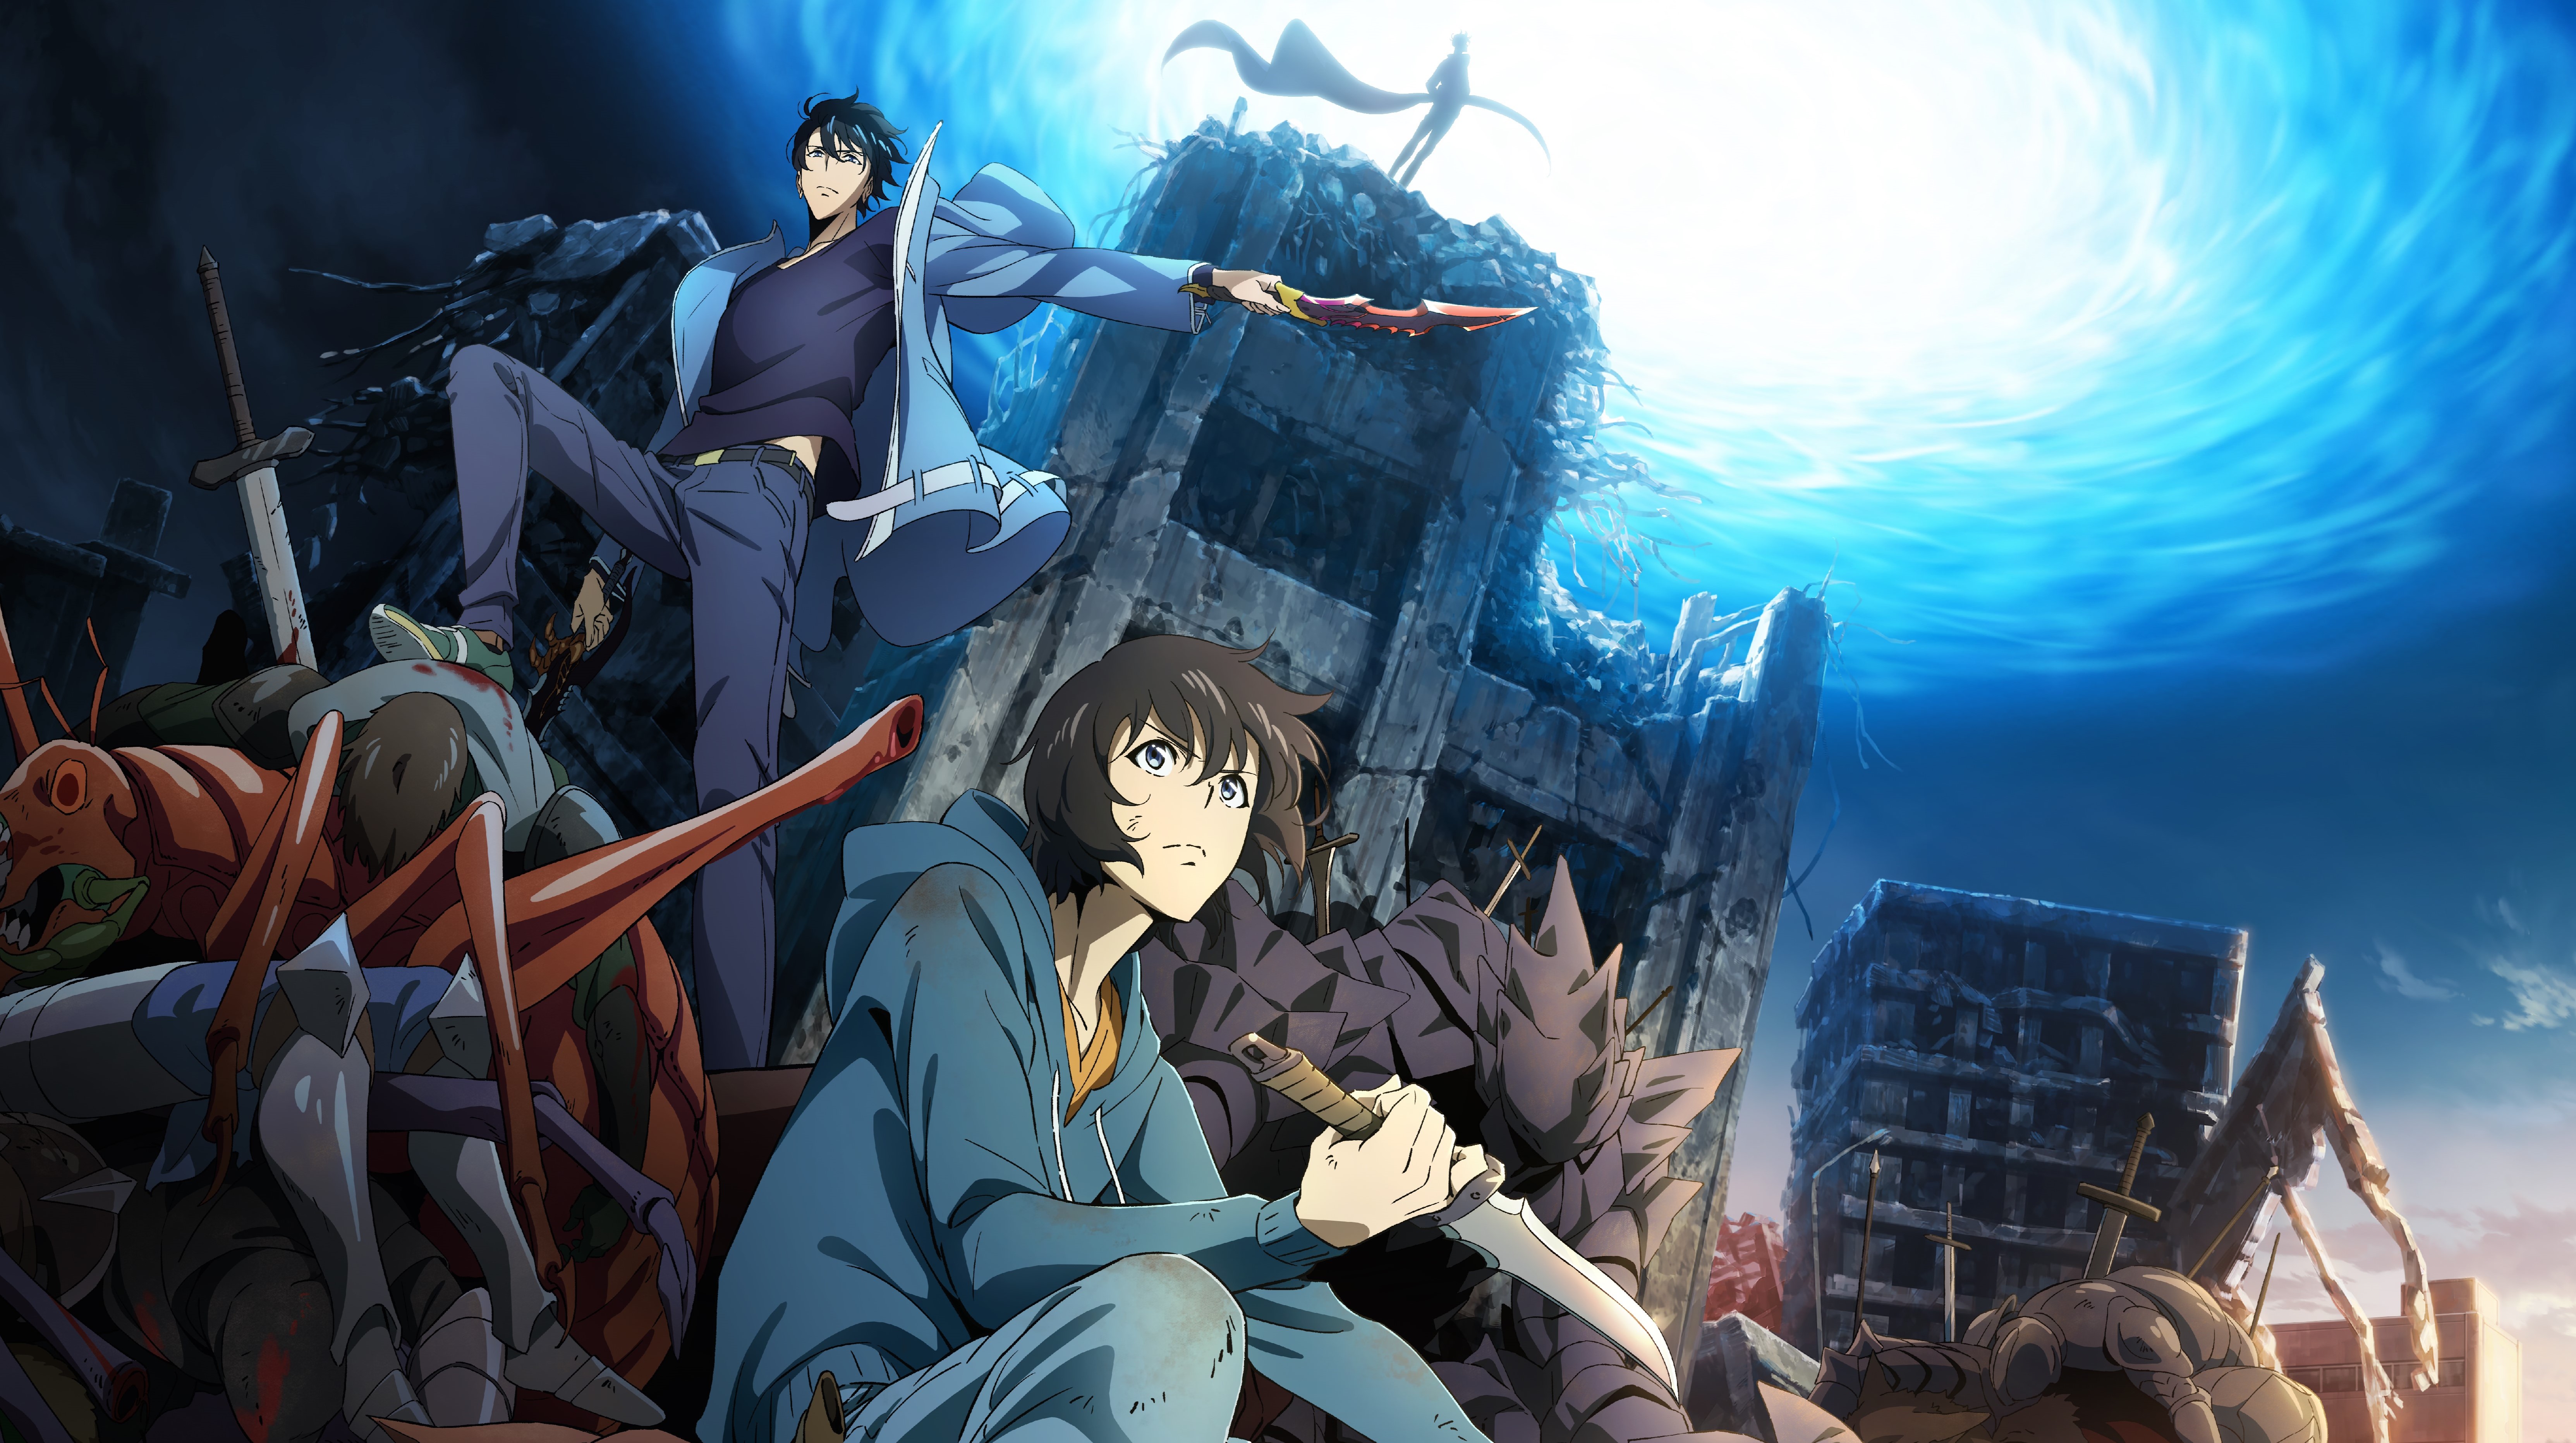 AX: Crunchyroll Digs Up New Trailers for 'Zom 100,' 'Attack on